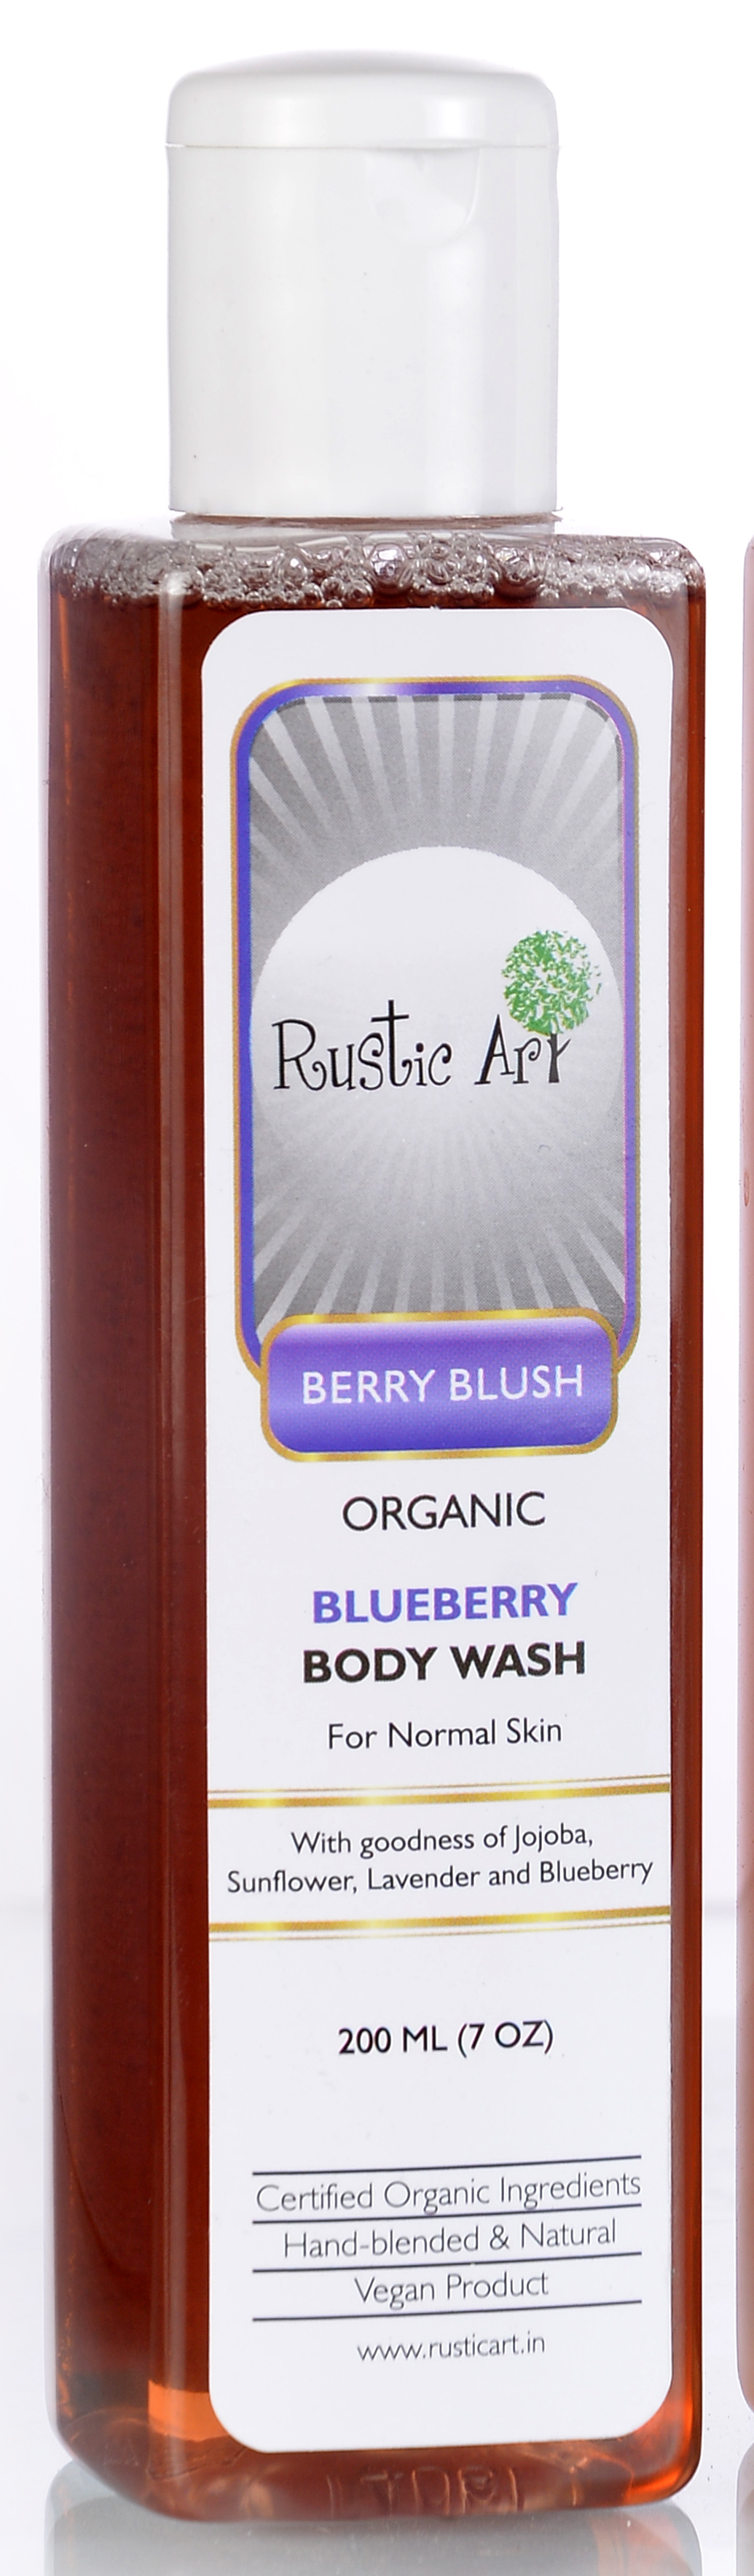 Buy Rustic Art Organic Blueberry Body Wash at Best Price Online